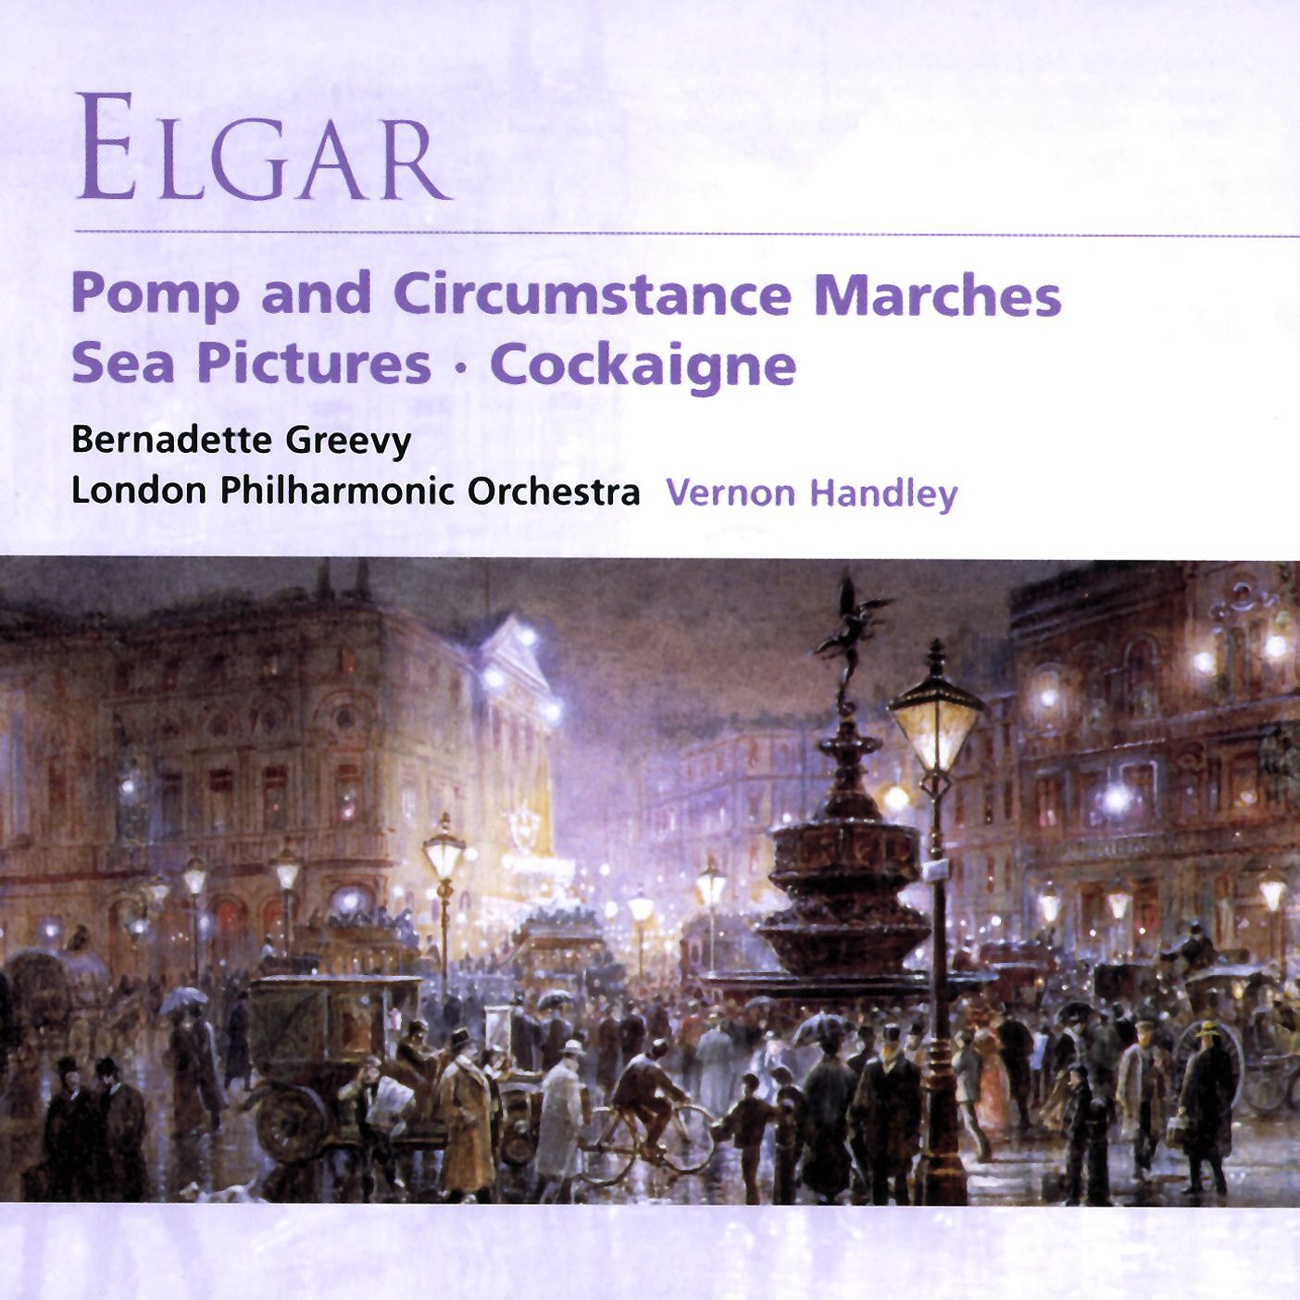 Pomp and Circumstance - Military Marches Op. 39: No. 4 in G